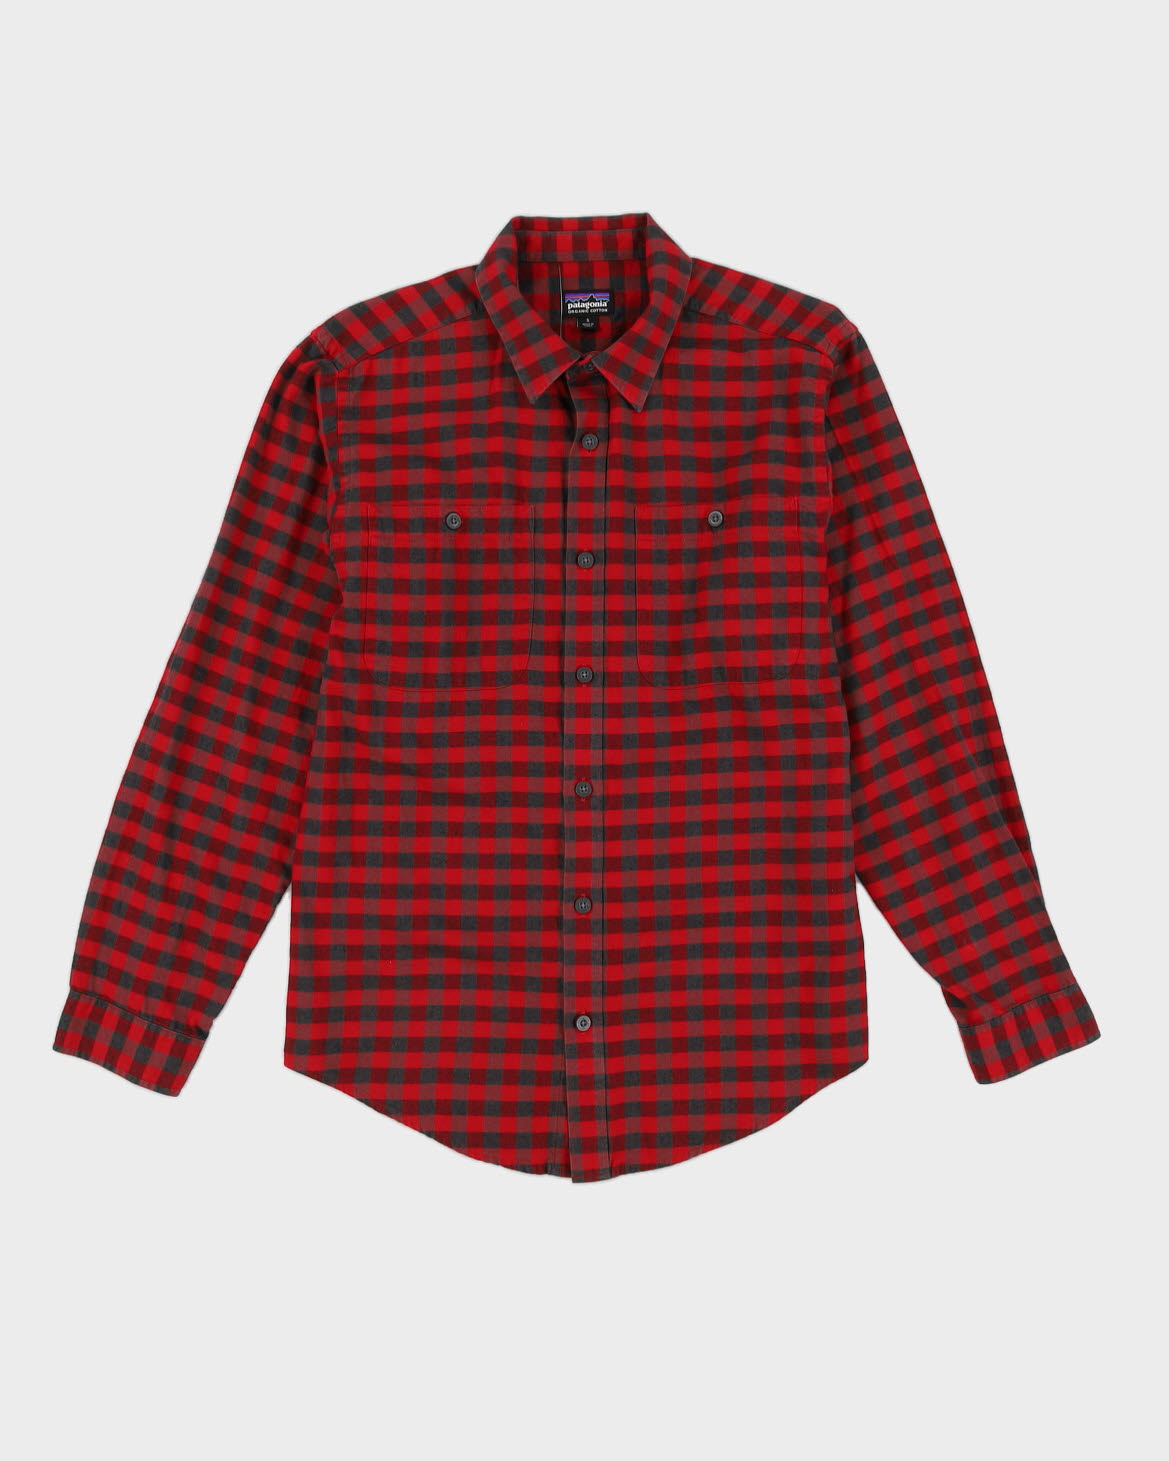 Patagonia Red Check Patterned Shirt - S